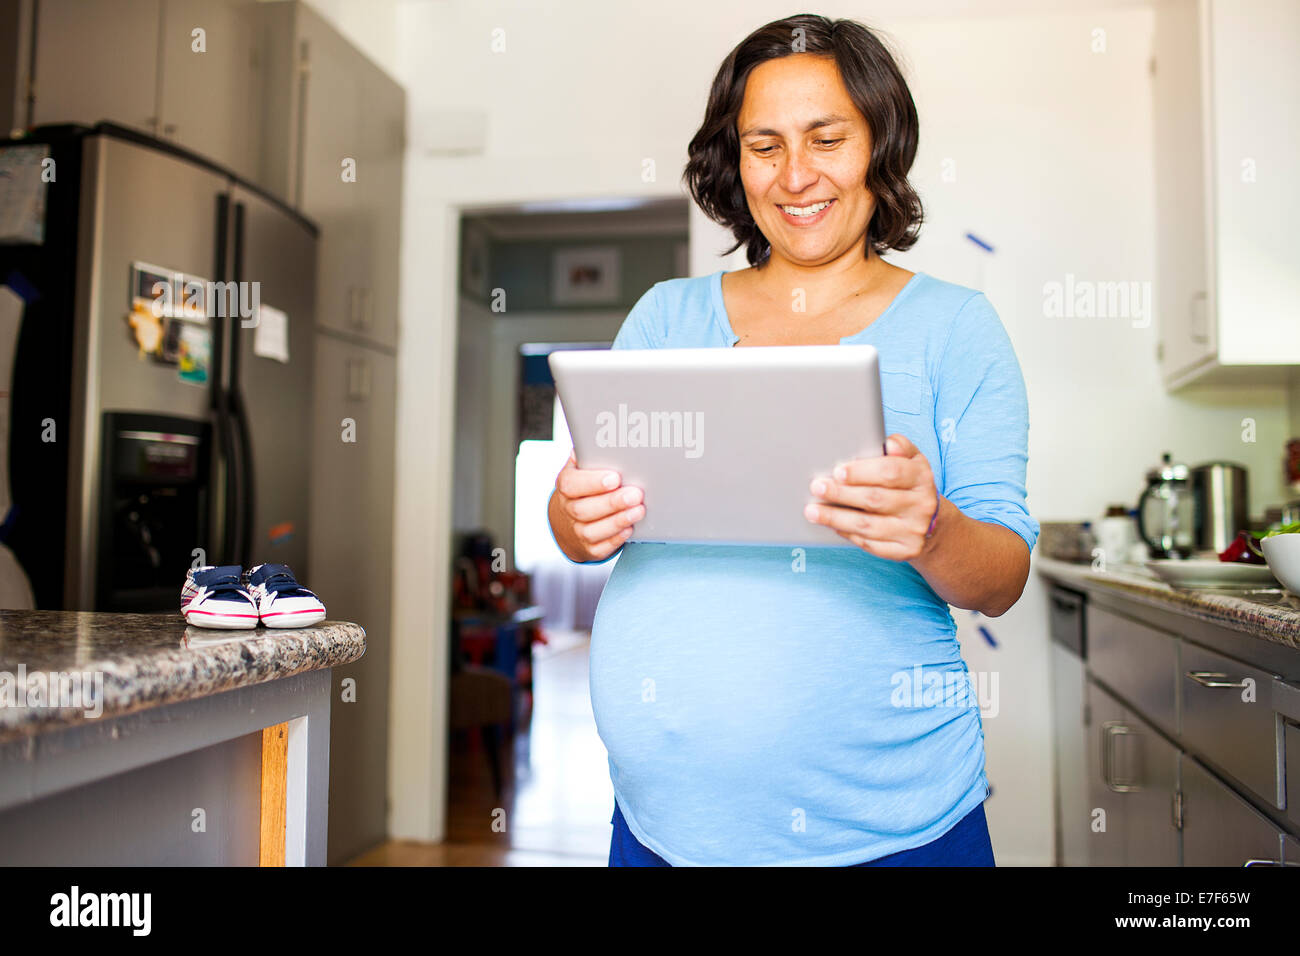 Pregnant Hispanic woman using tablet computer in kitchen Banque D'Images